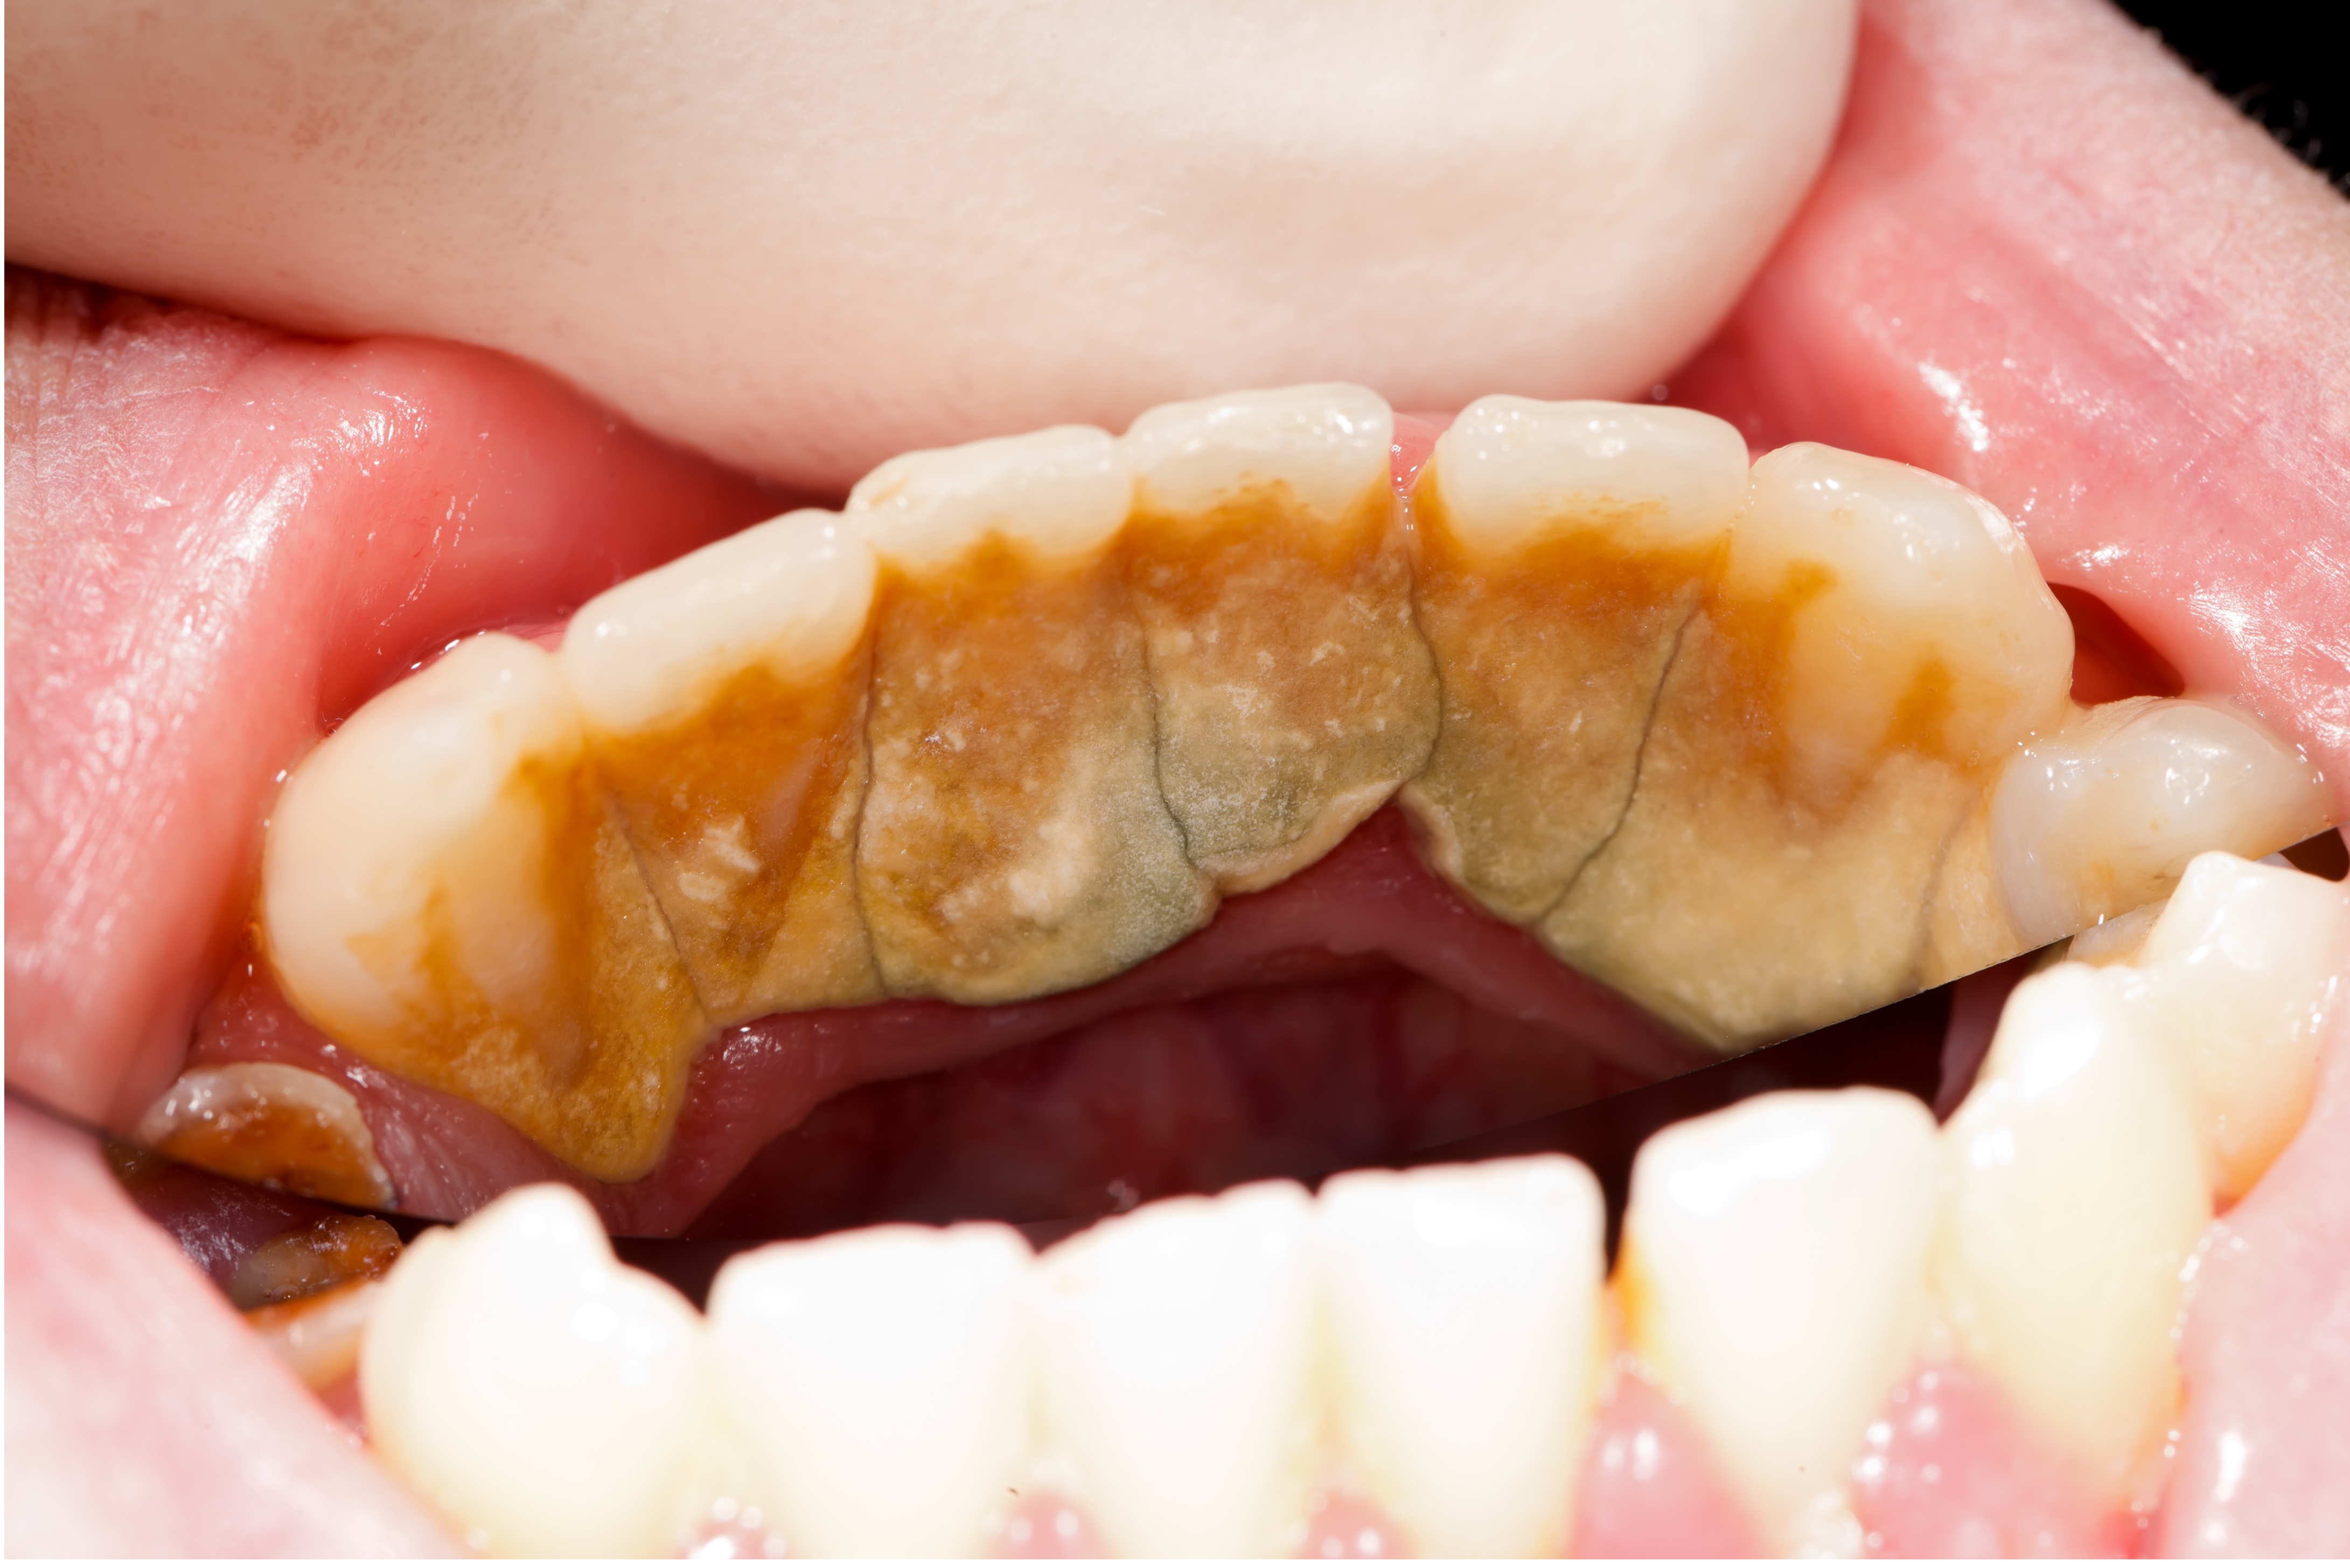 Plaque on Teeth Causes and How to Remove Plaque Buildup